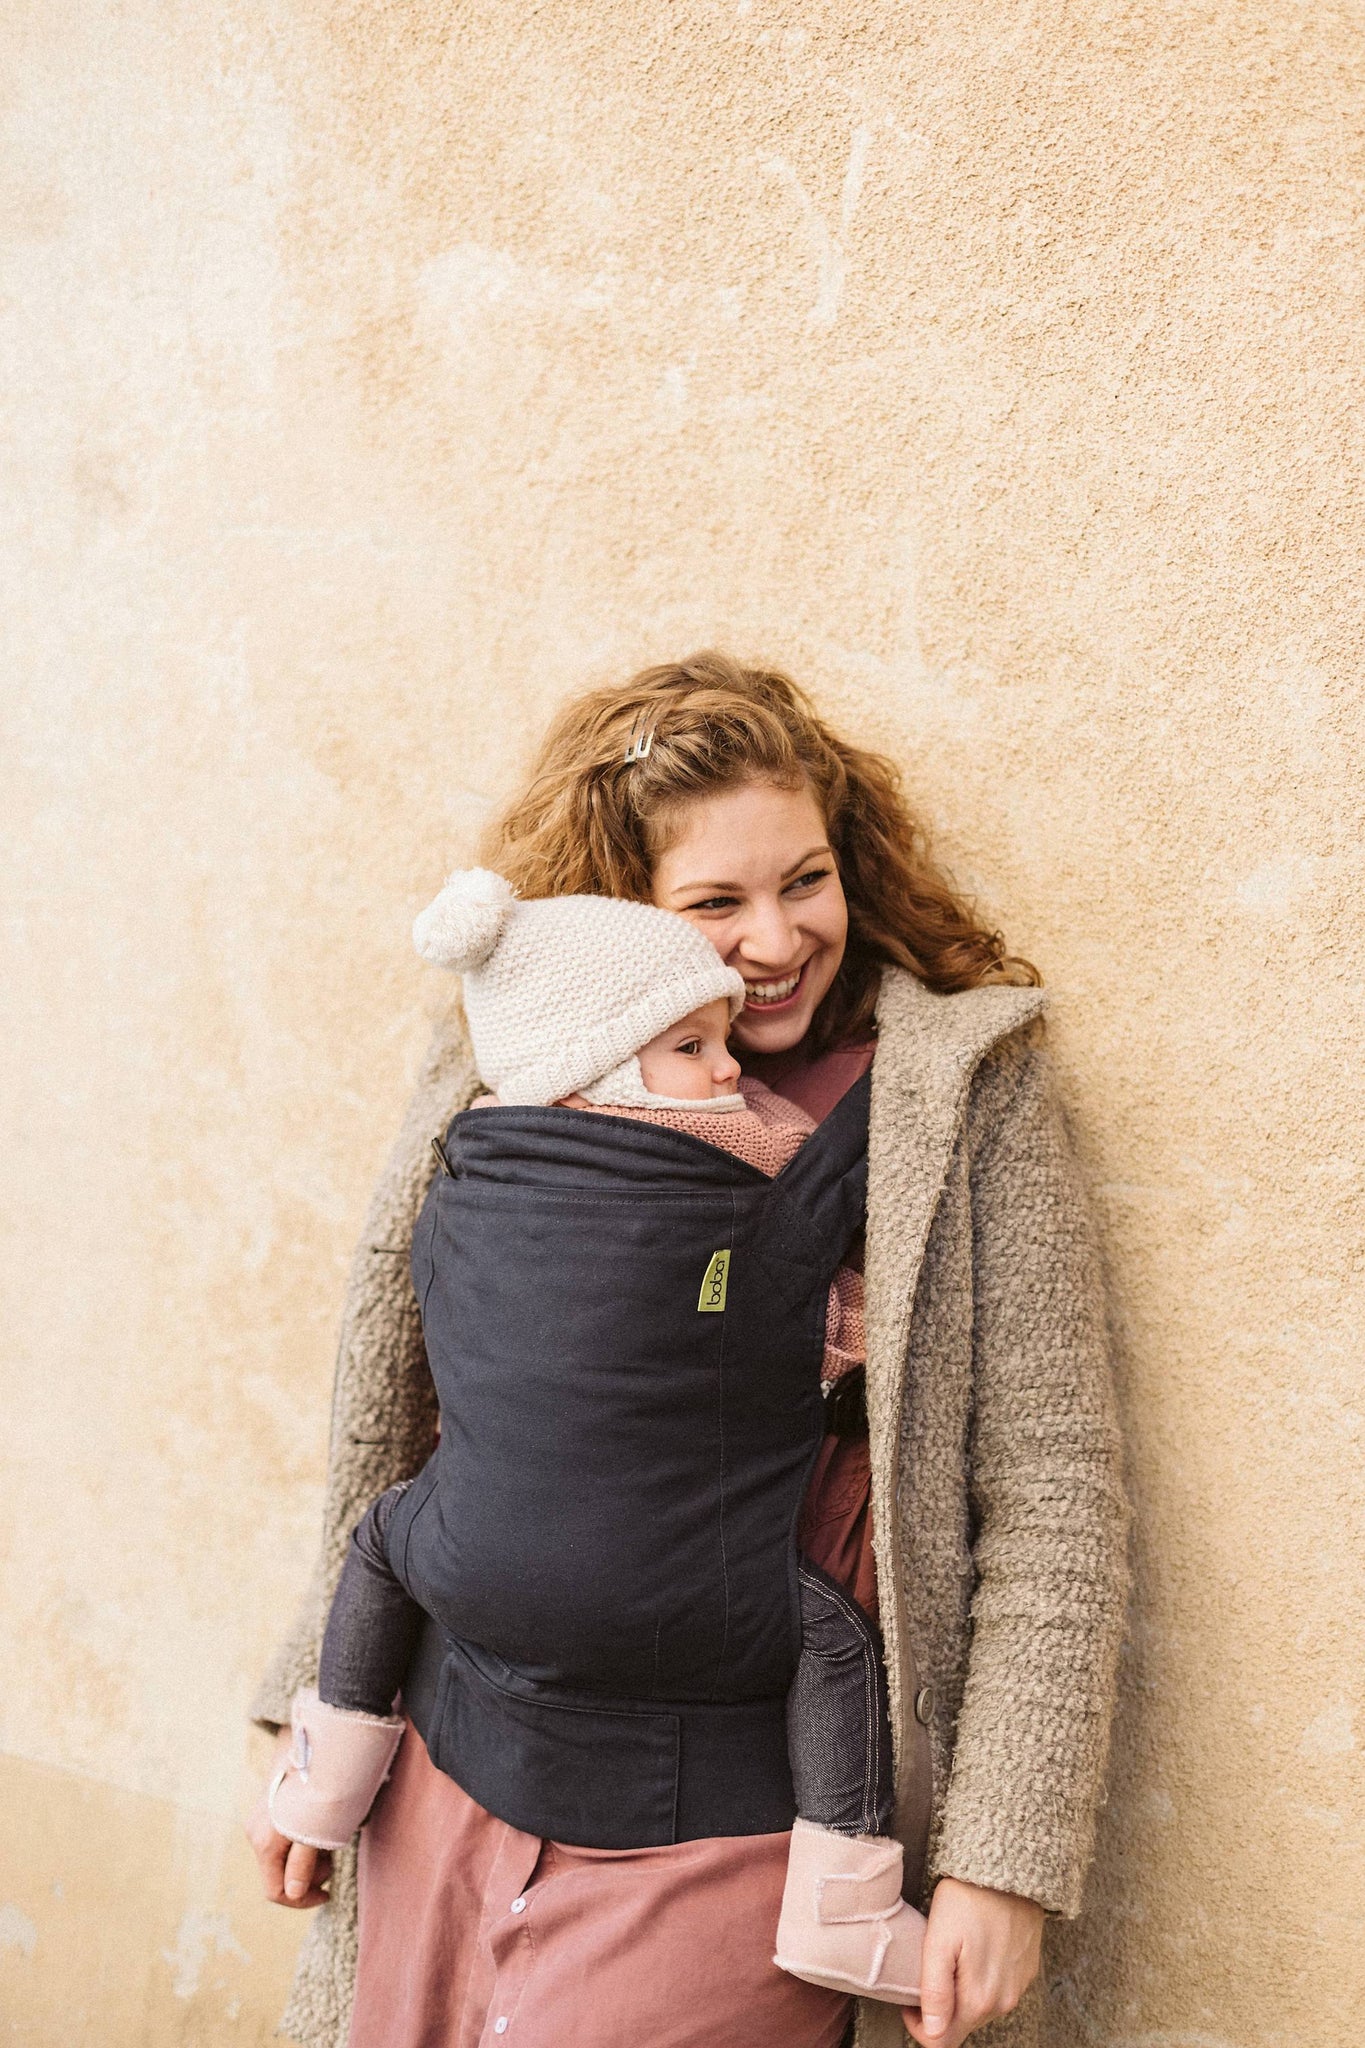 Boba classic baby carrier Navy. Our streamlined soft structured baby carrier is designed to go and grow with your little one. This ergonomic front facing baby carrier is ready to use from infant to toddler.